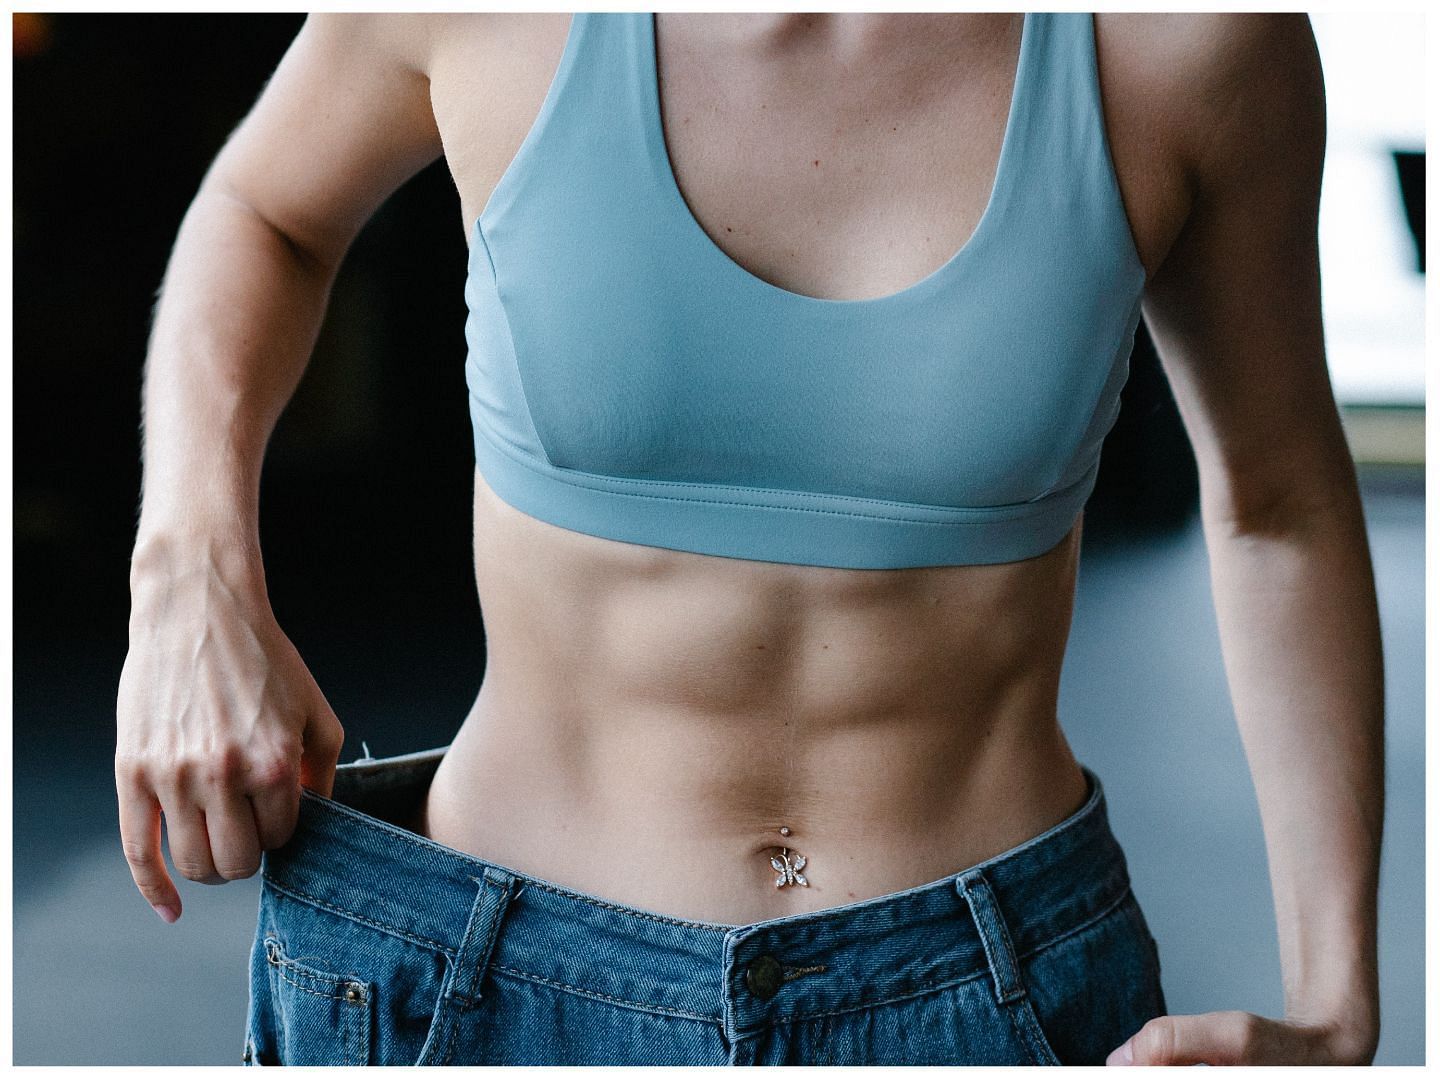 Want to get stronger abs? Try these home-based five best oblique exercises. (Image via Pexels /Annushka Ahuja)